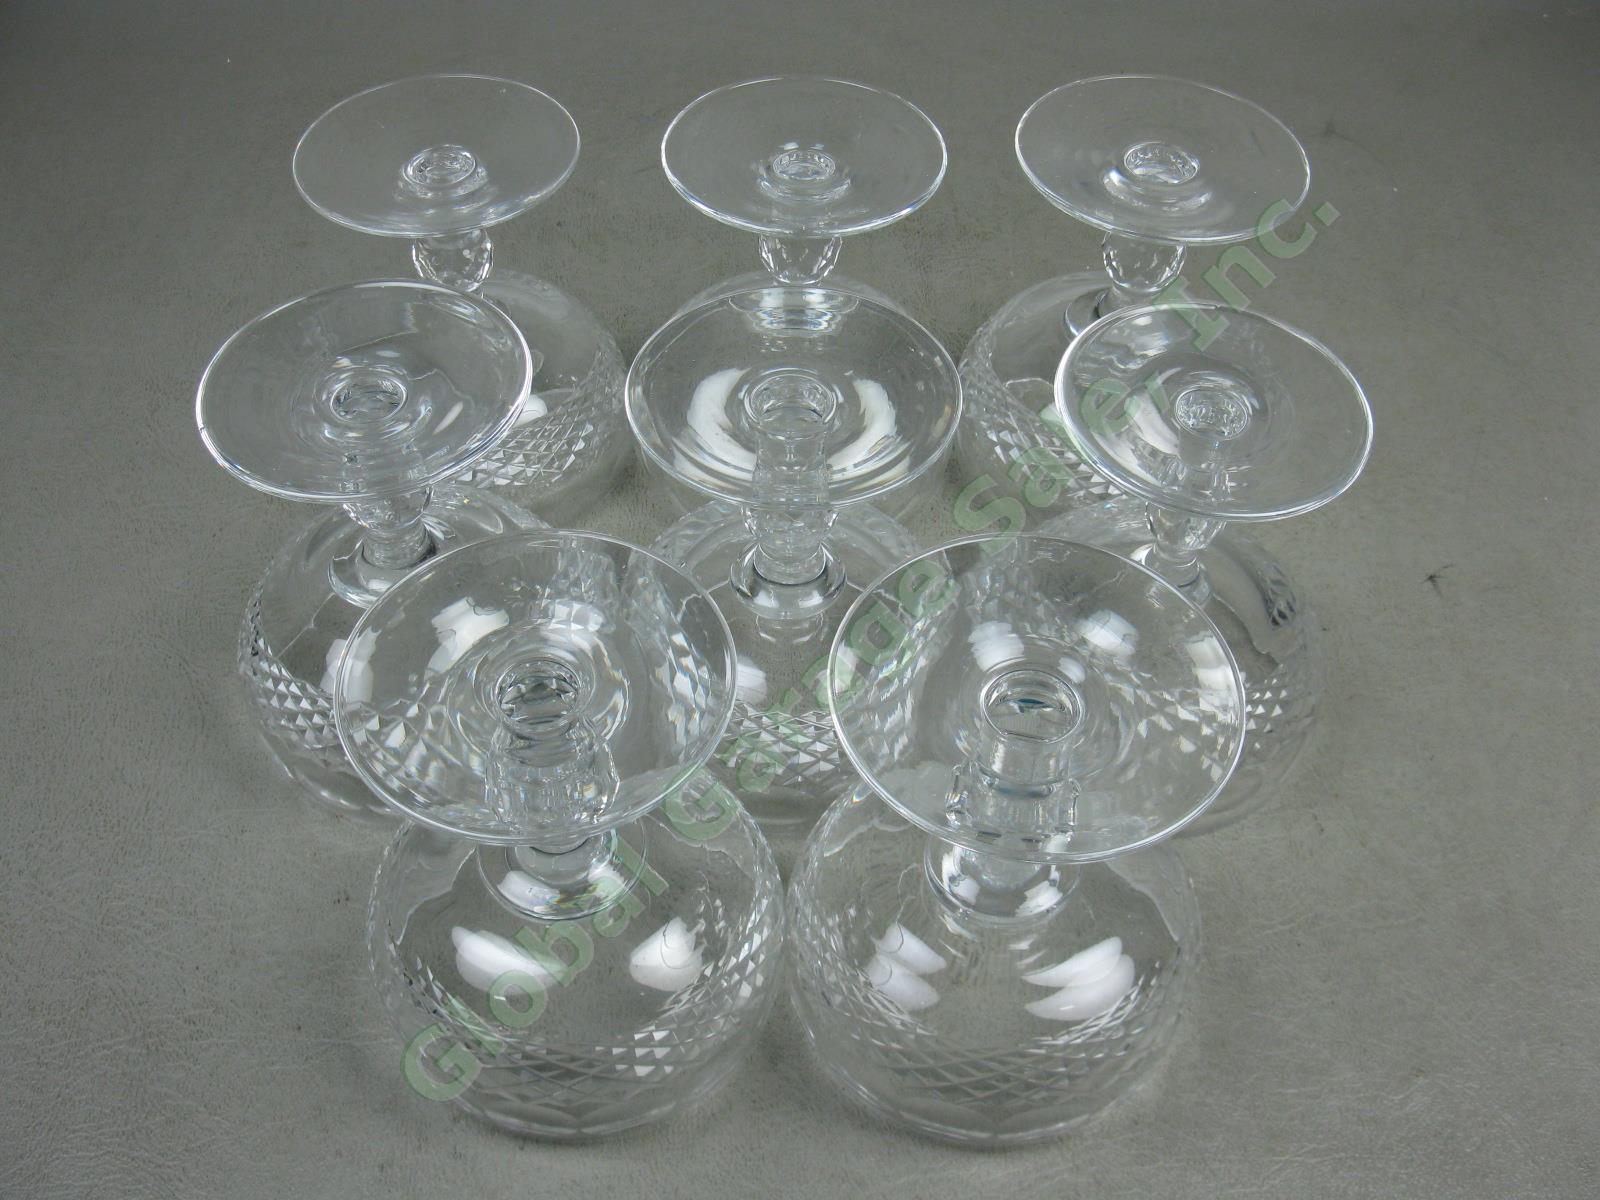 8 Waterford Crystal Colleen Short Stem Champagne Tall Sherbet Glasses Set 4-3/8" 2